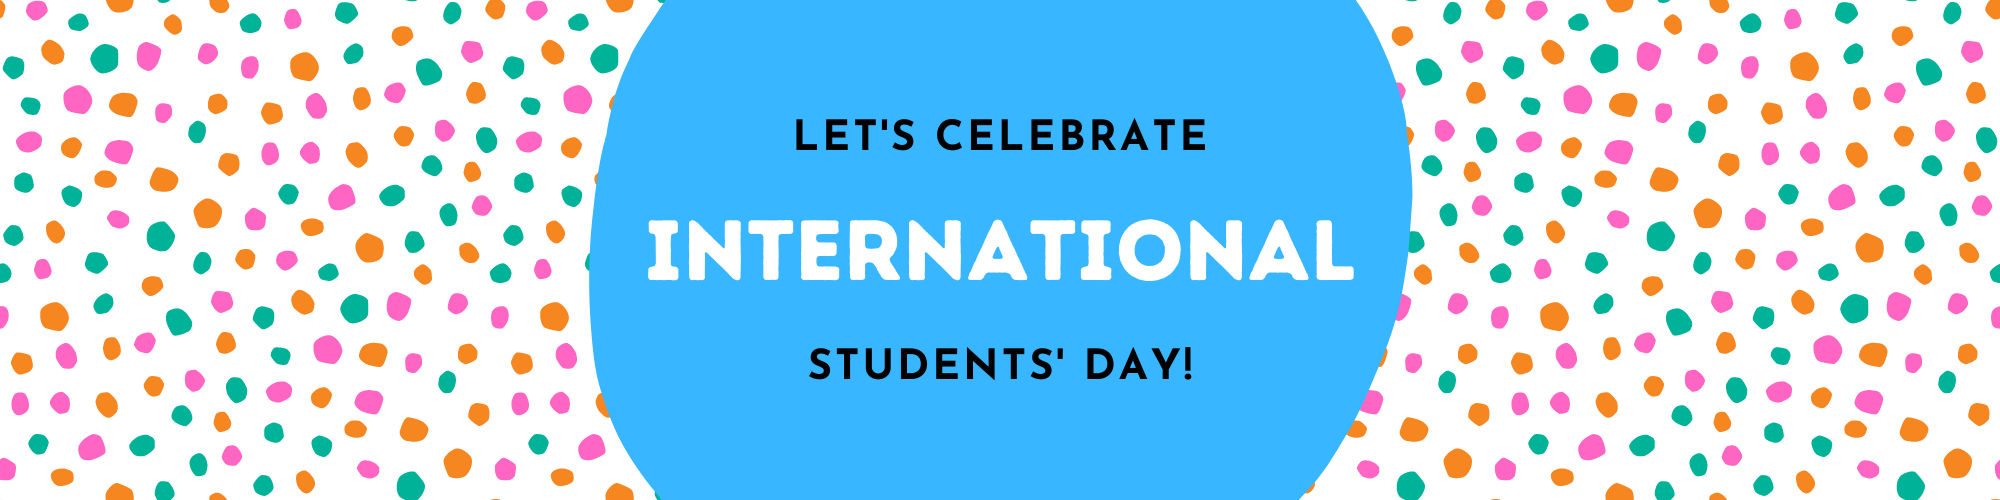 Banner image with large blue circle in the middle stating "Let's celebrate International students' day!". Image has multi-coloured dots in the background.